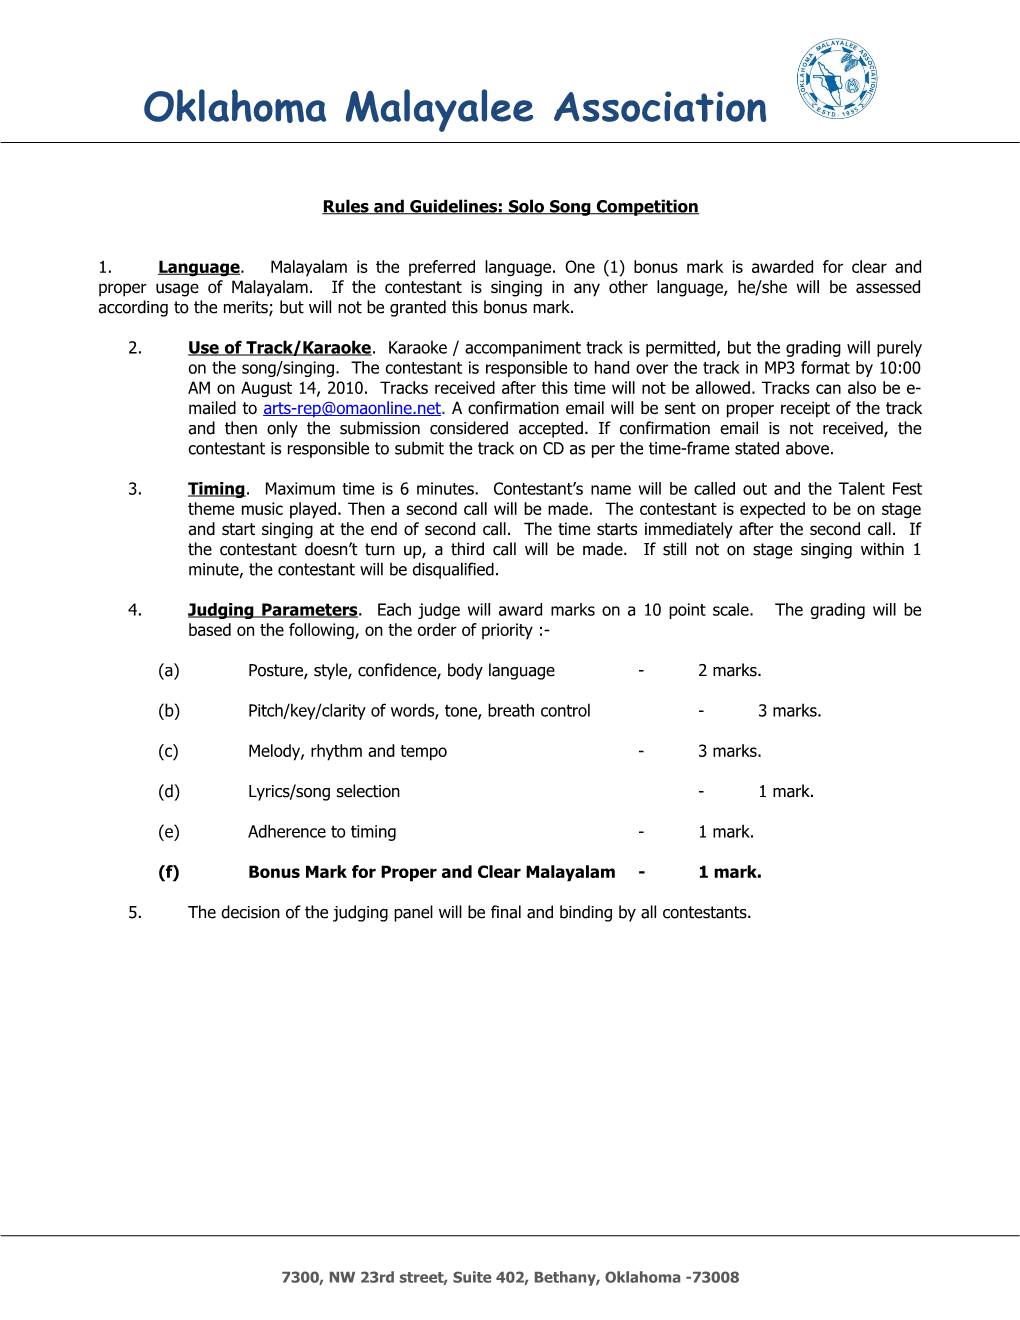 Rules and Guidelines for Speech Competition